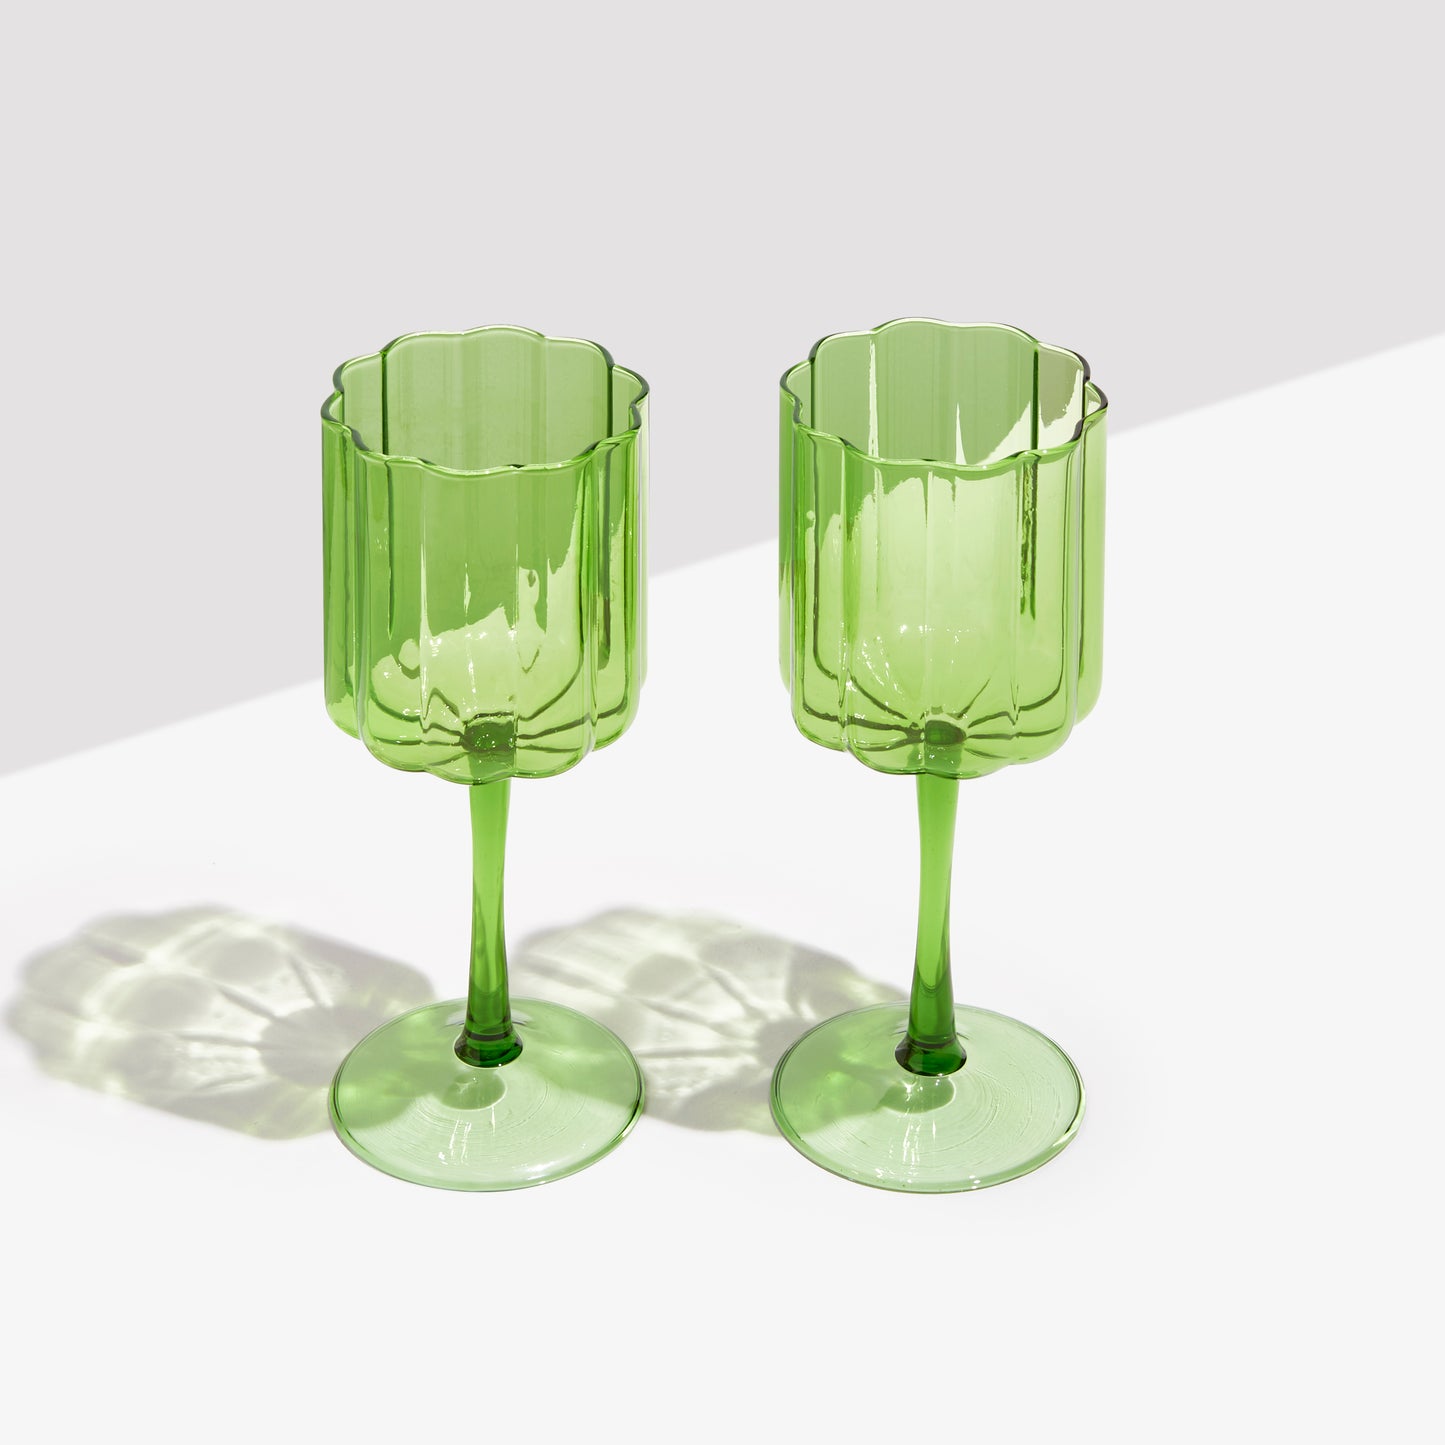 TWO x WAVE WINE GLASSES - GREEN